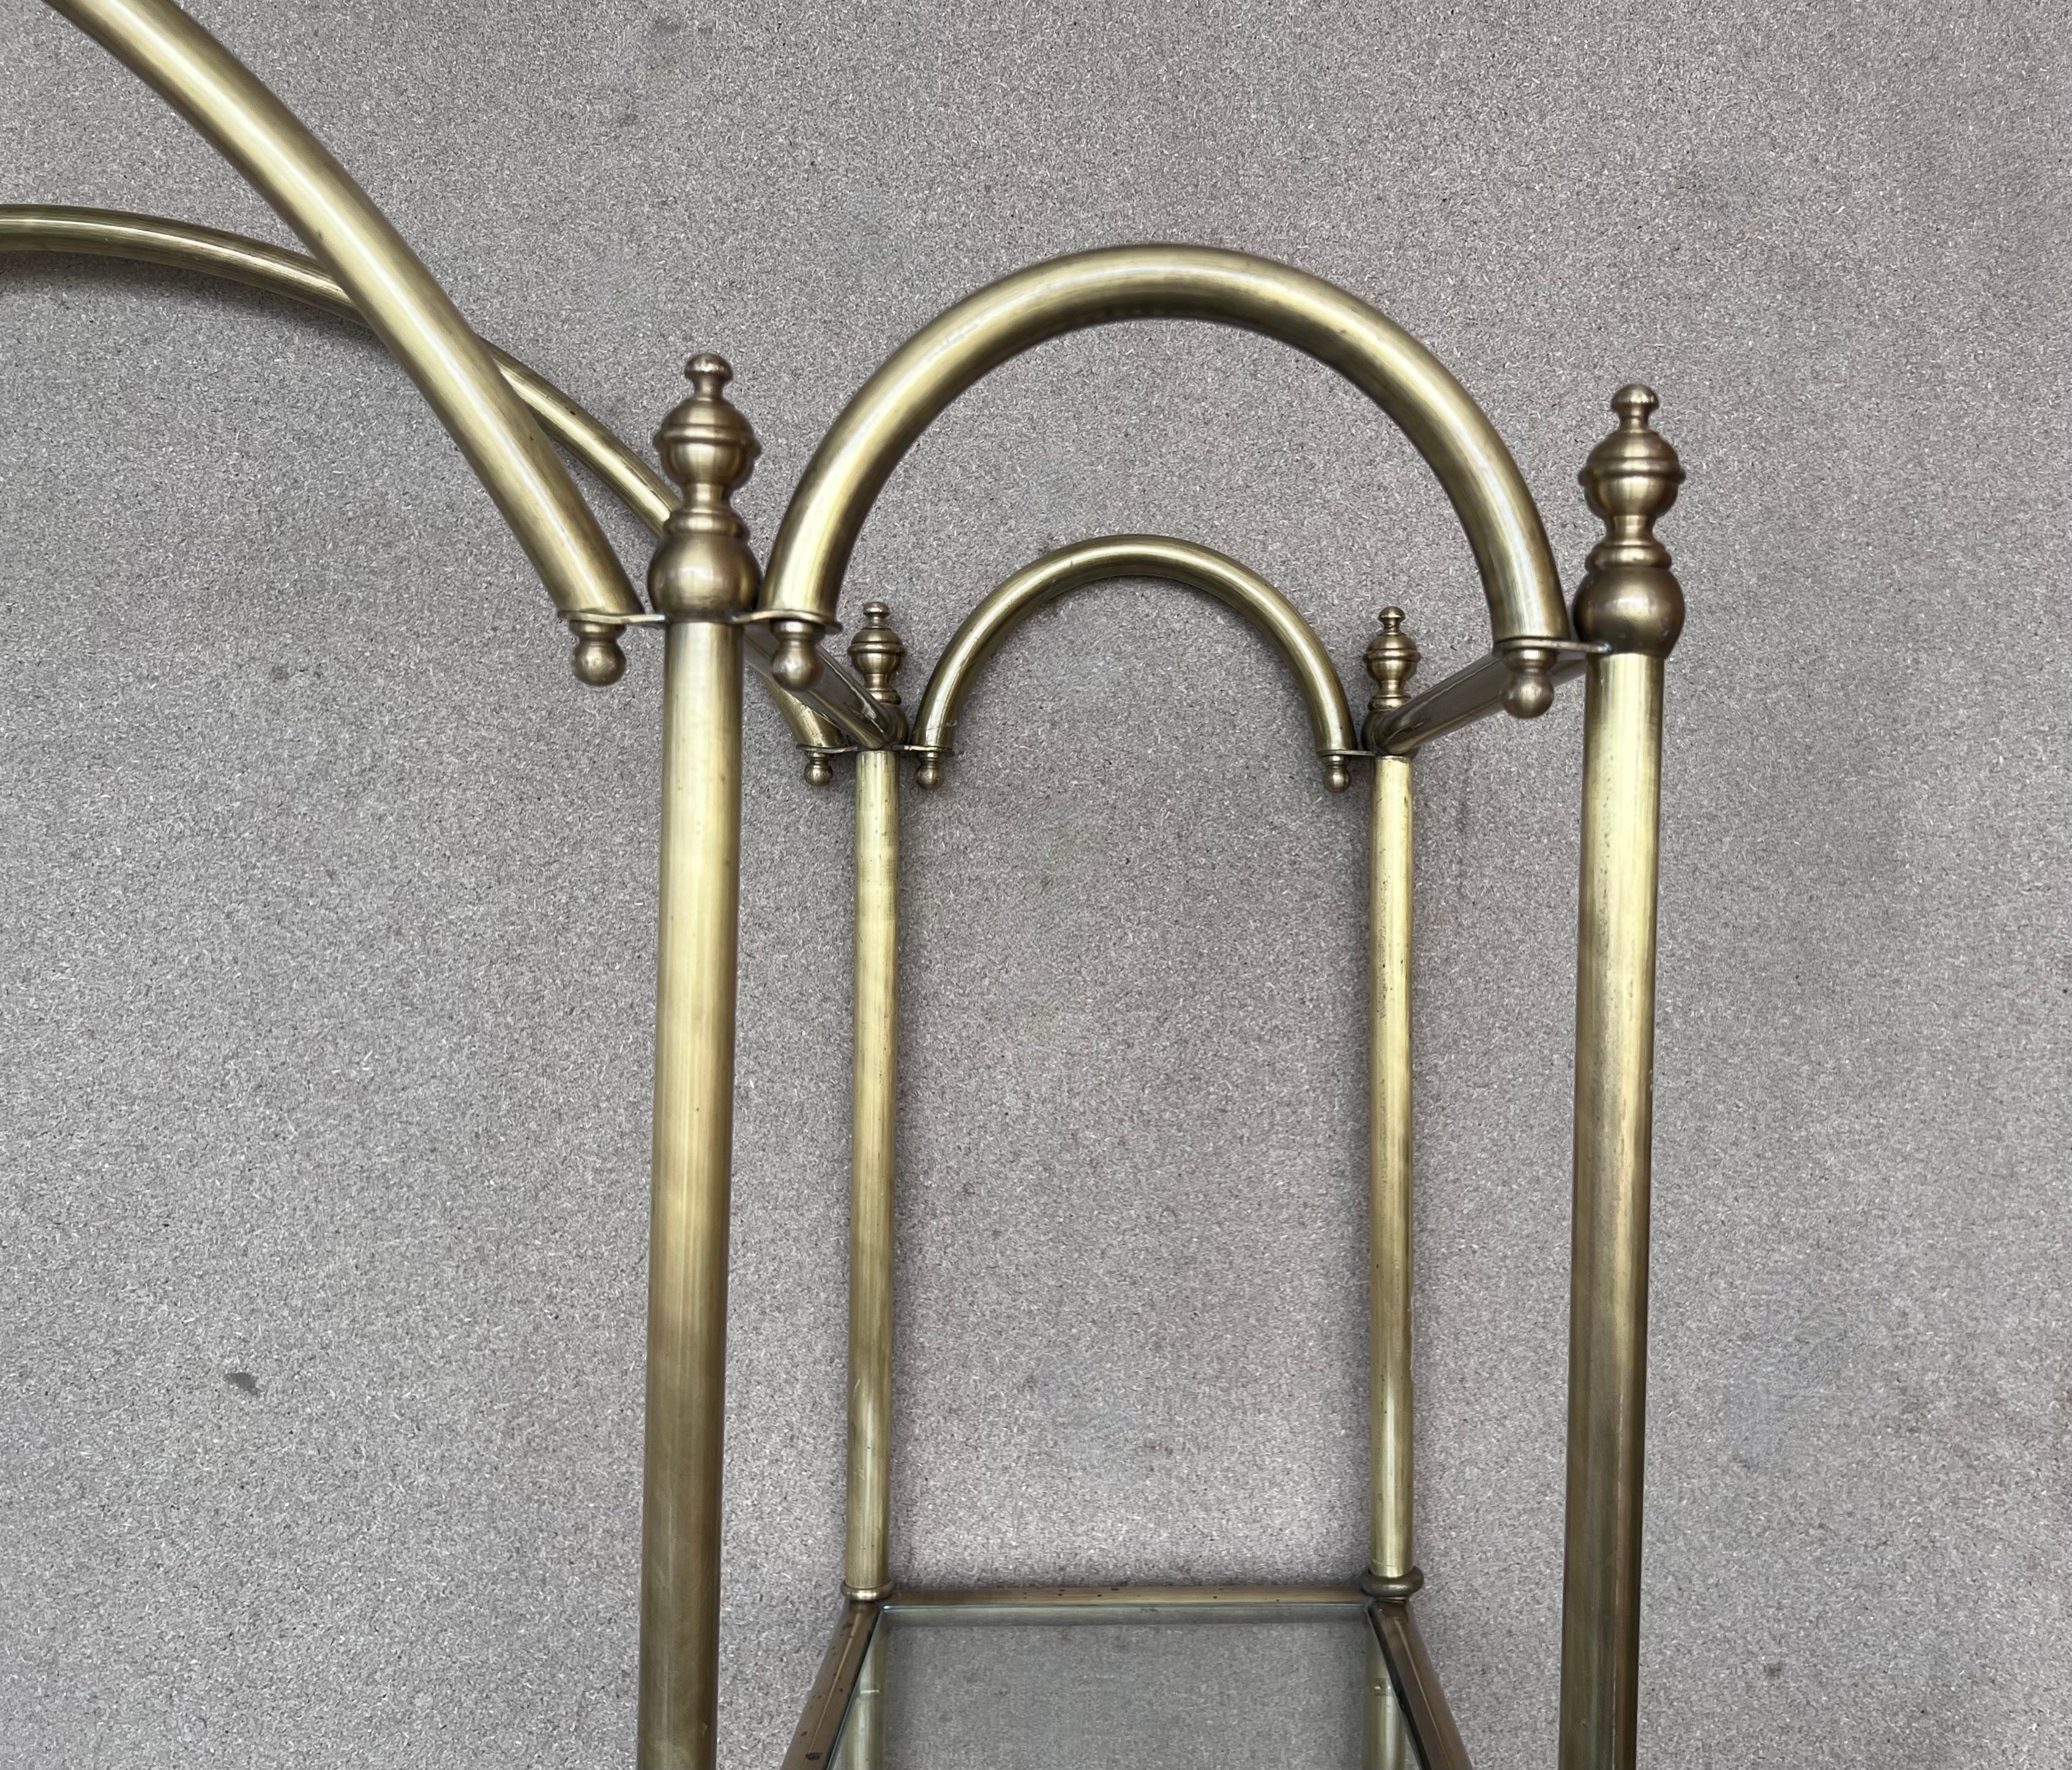 Italian Vintage Brass Étagère Arched Glass Display Shelf with Three + Four Shelves For Sale